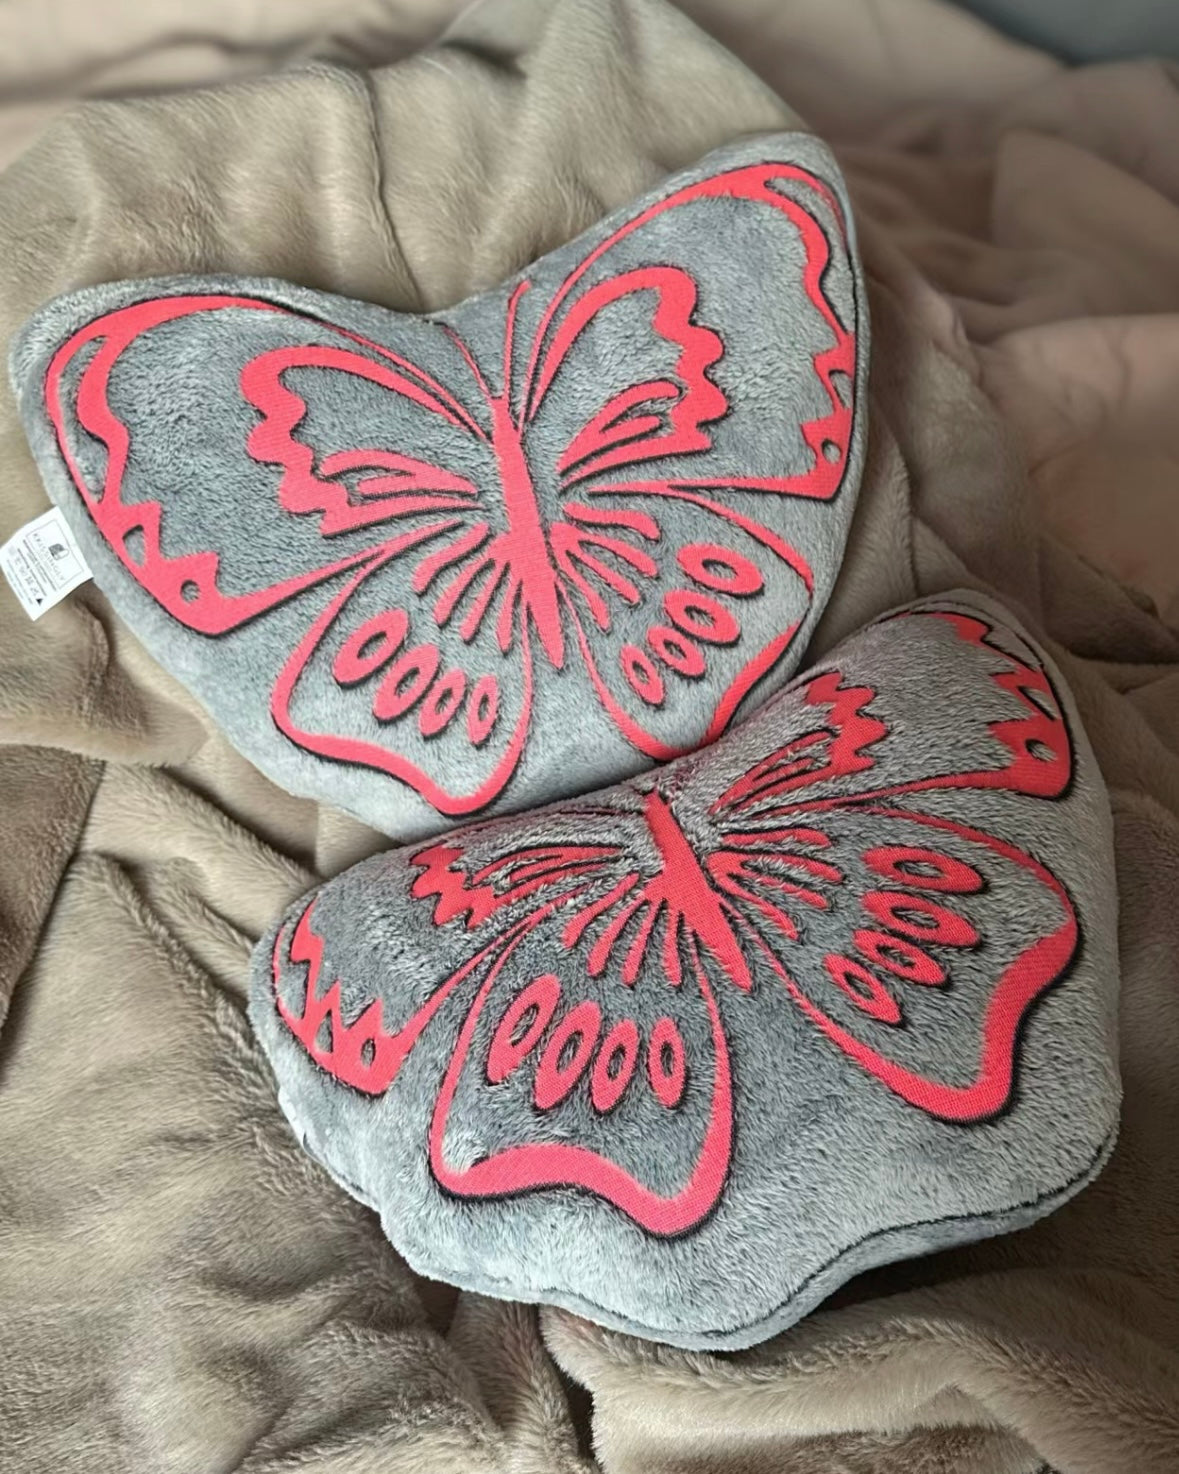 Glowing Butterfly Shaped Pillow - Luminescent Bedroom Decor, Soft Glow Cushion, Glow-in-the-Dark Decorative Accent